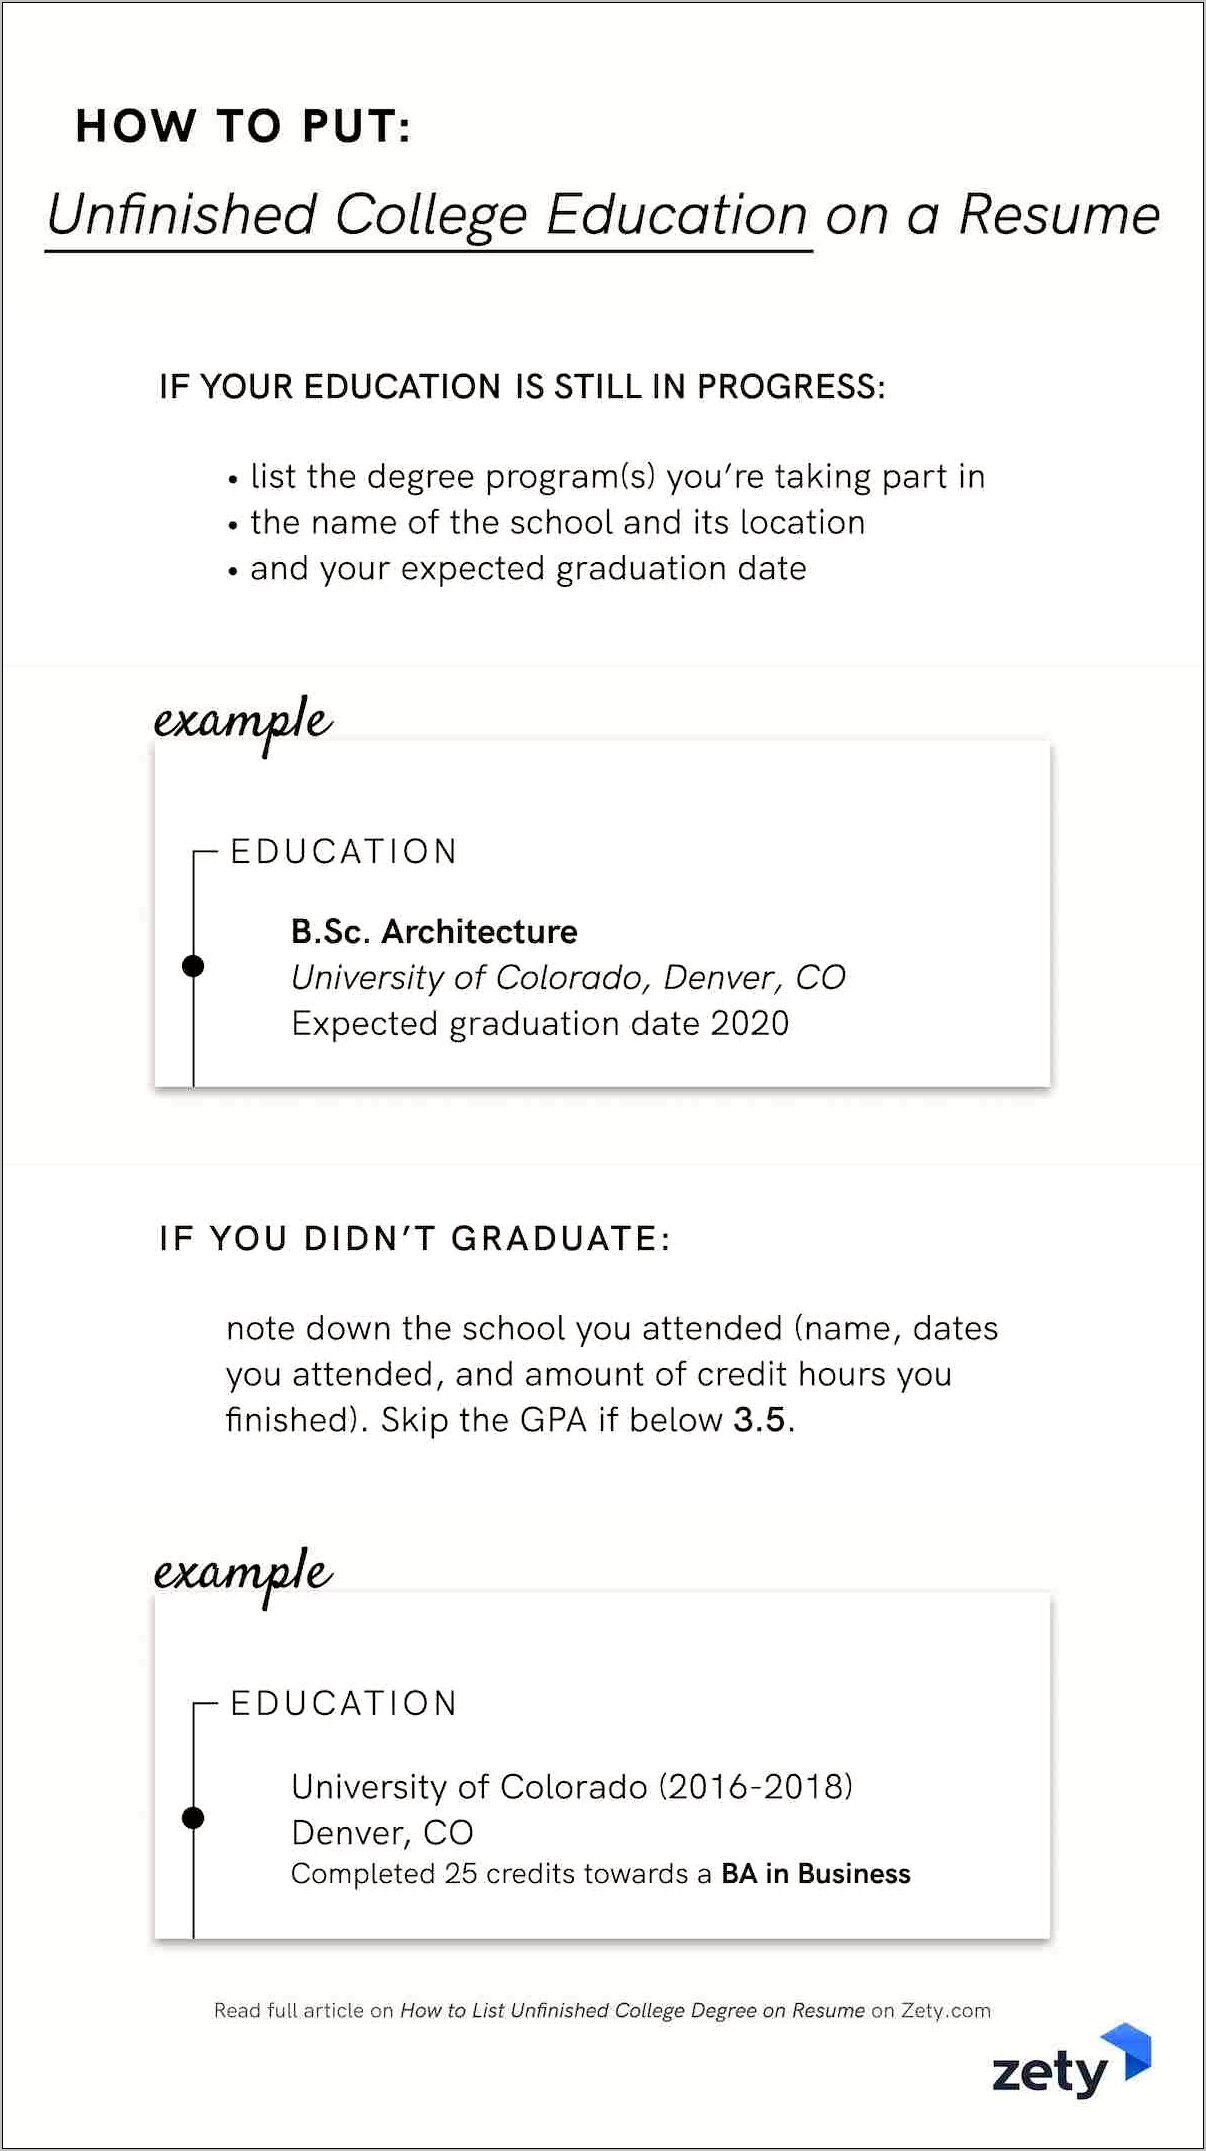 Examples Of Degrees In Process On Resume